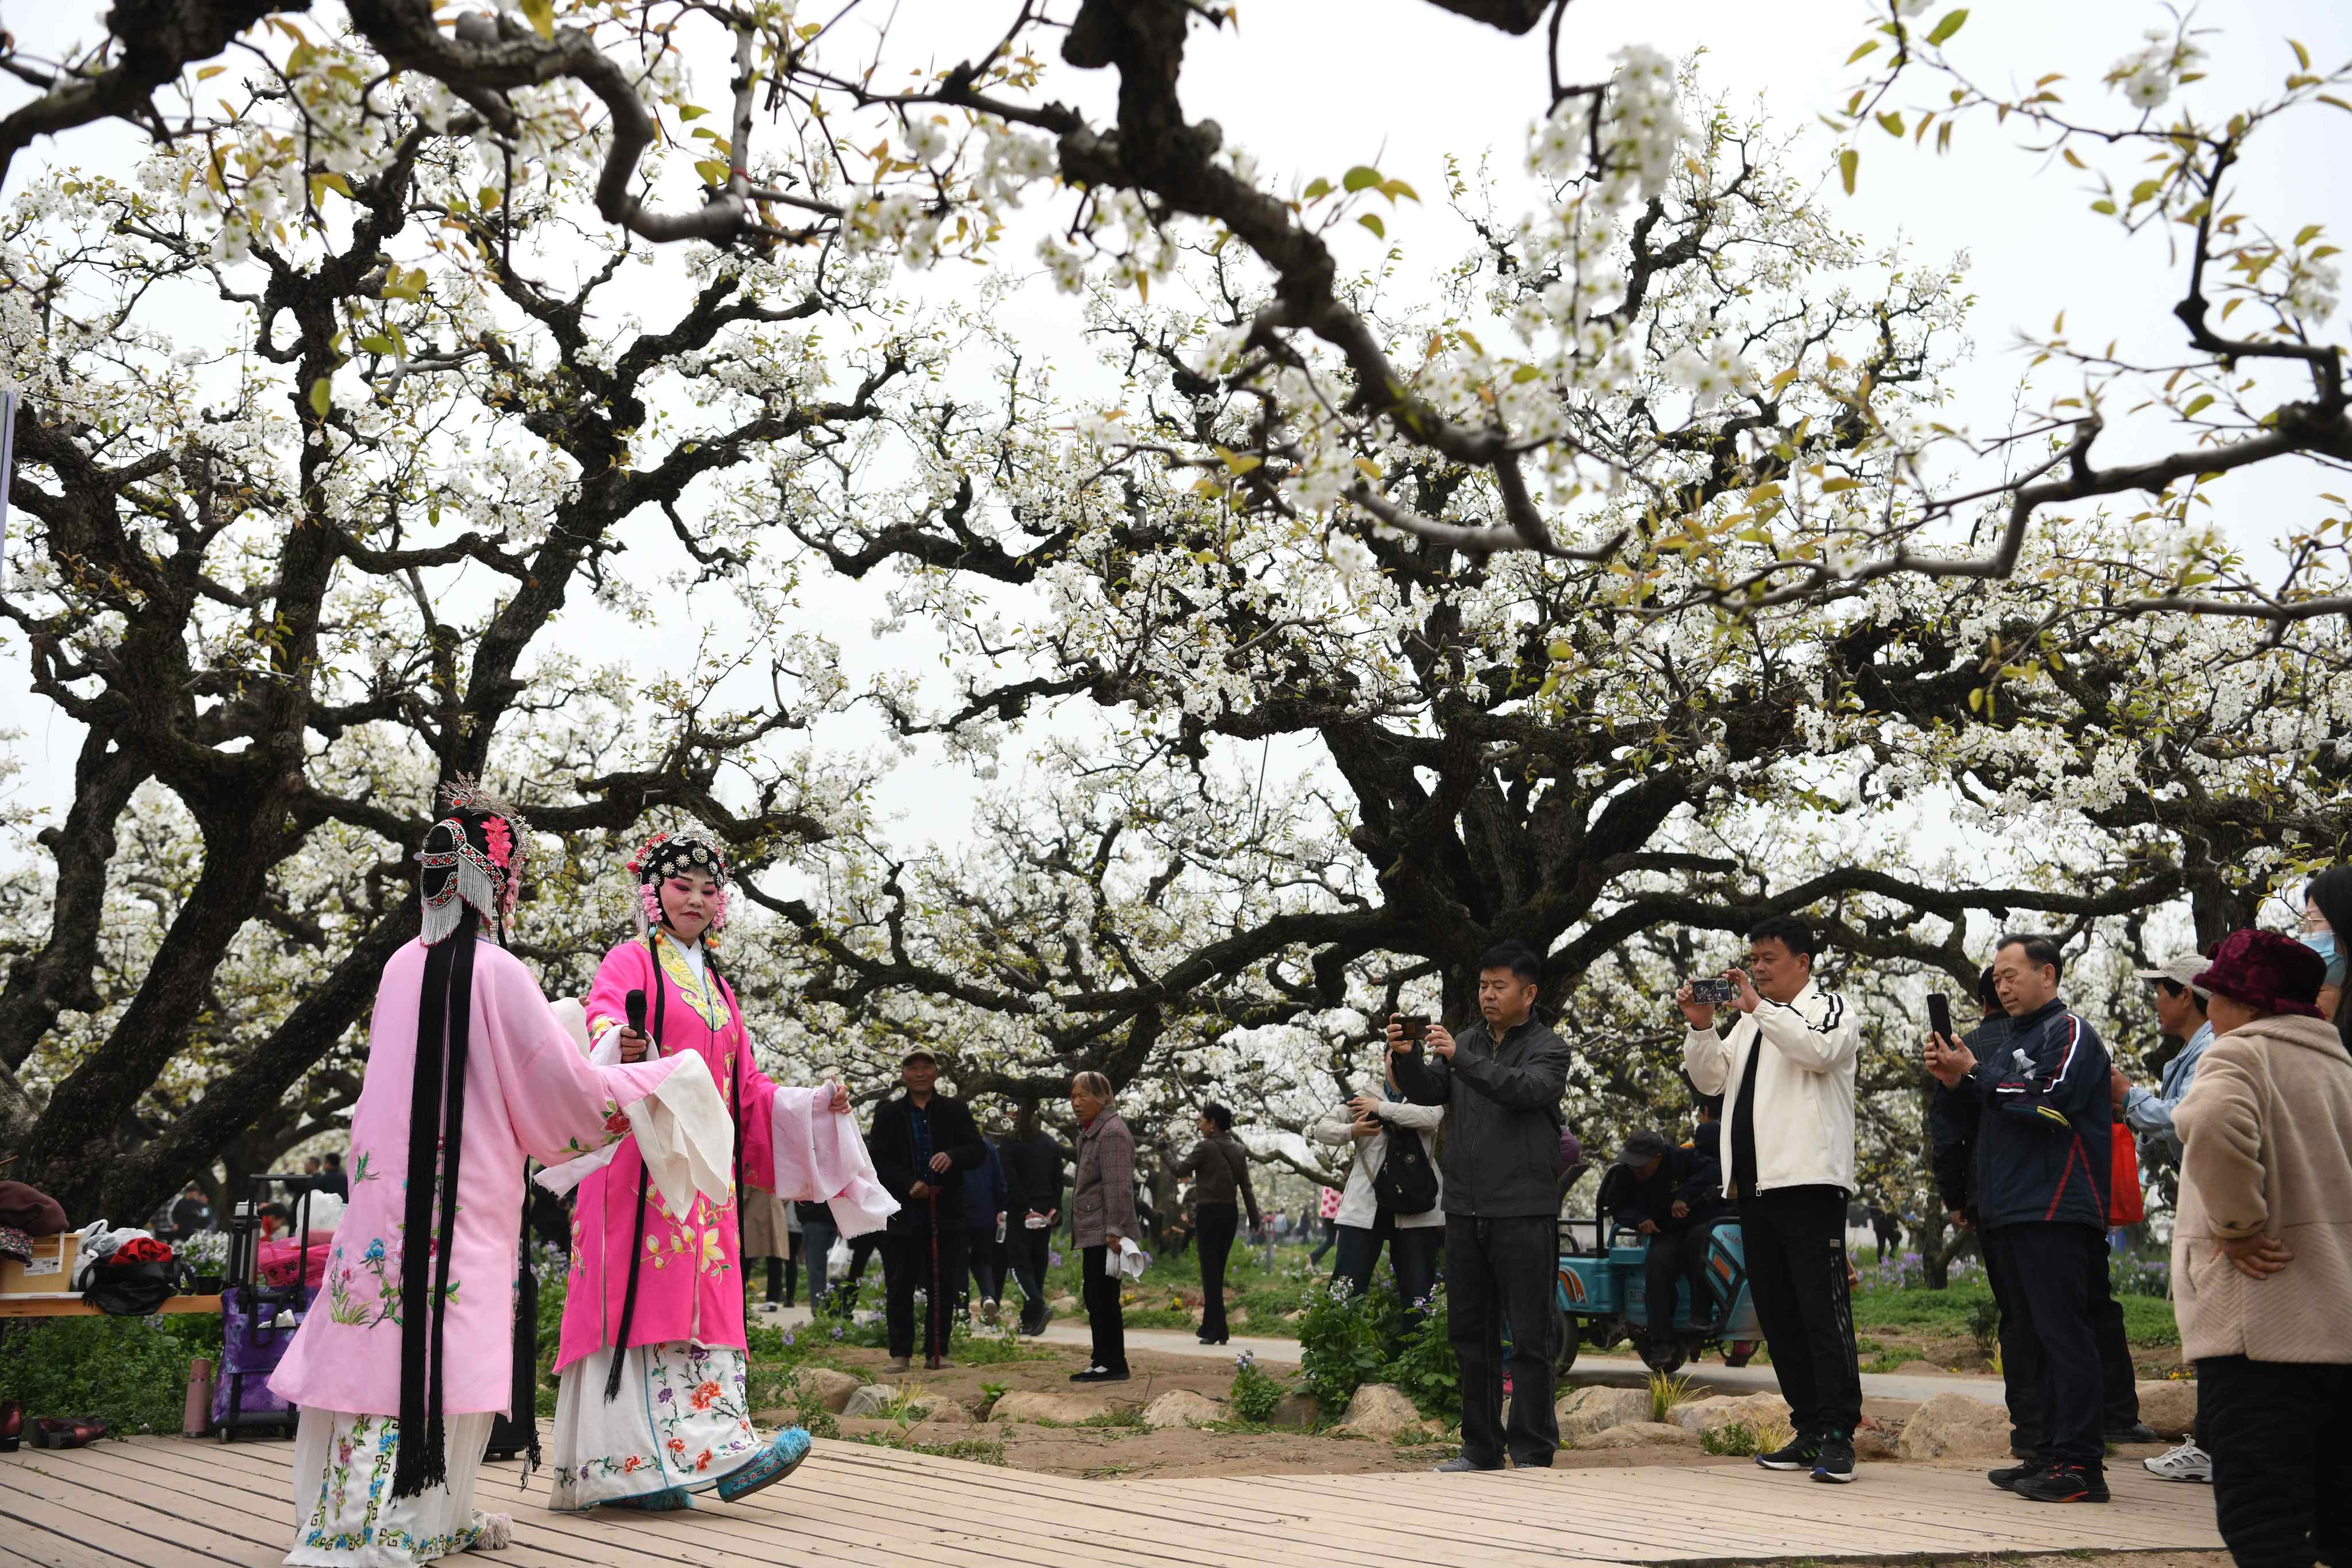 Tourists watch a folk art performance among pear blossoms in Dangshan, east China’s Anhui province, on April 2. China’s domestic tourism has recovered but it’s a different story for international travel. Photo: Xinhua